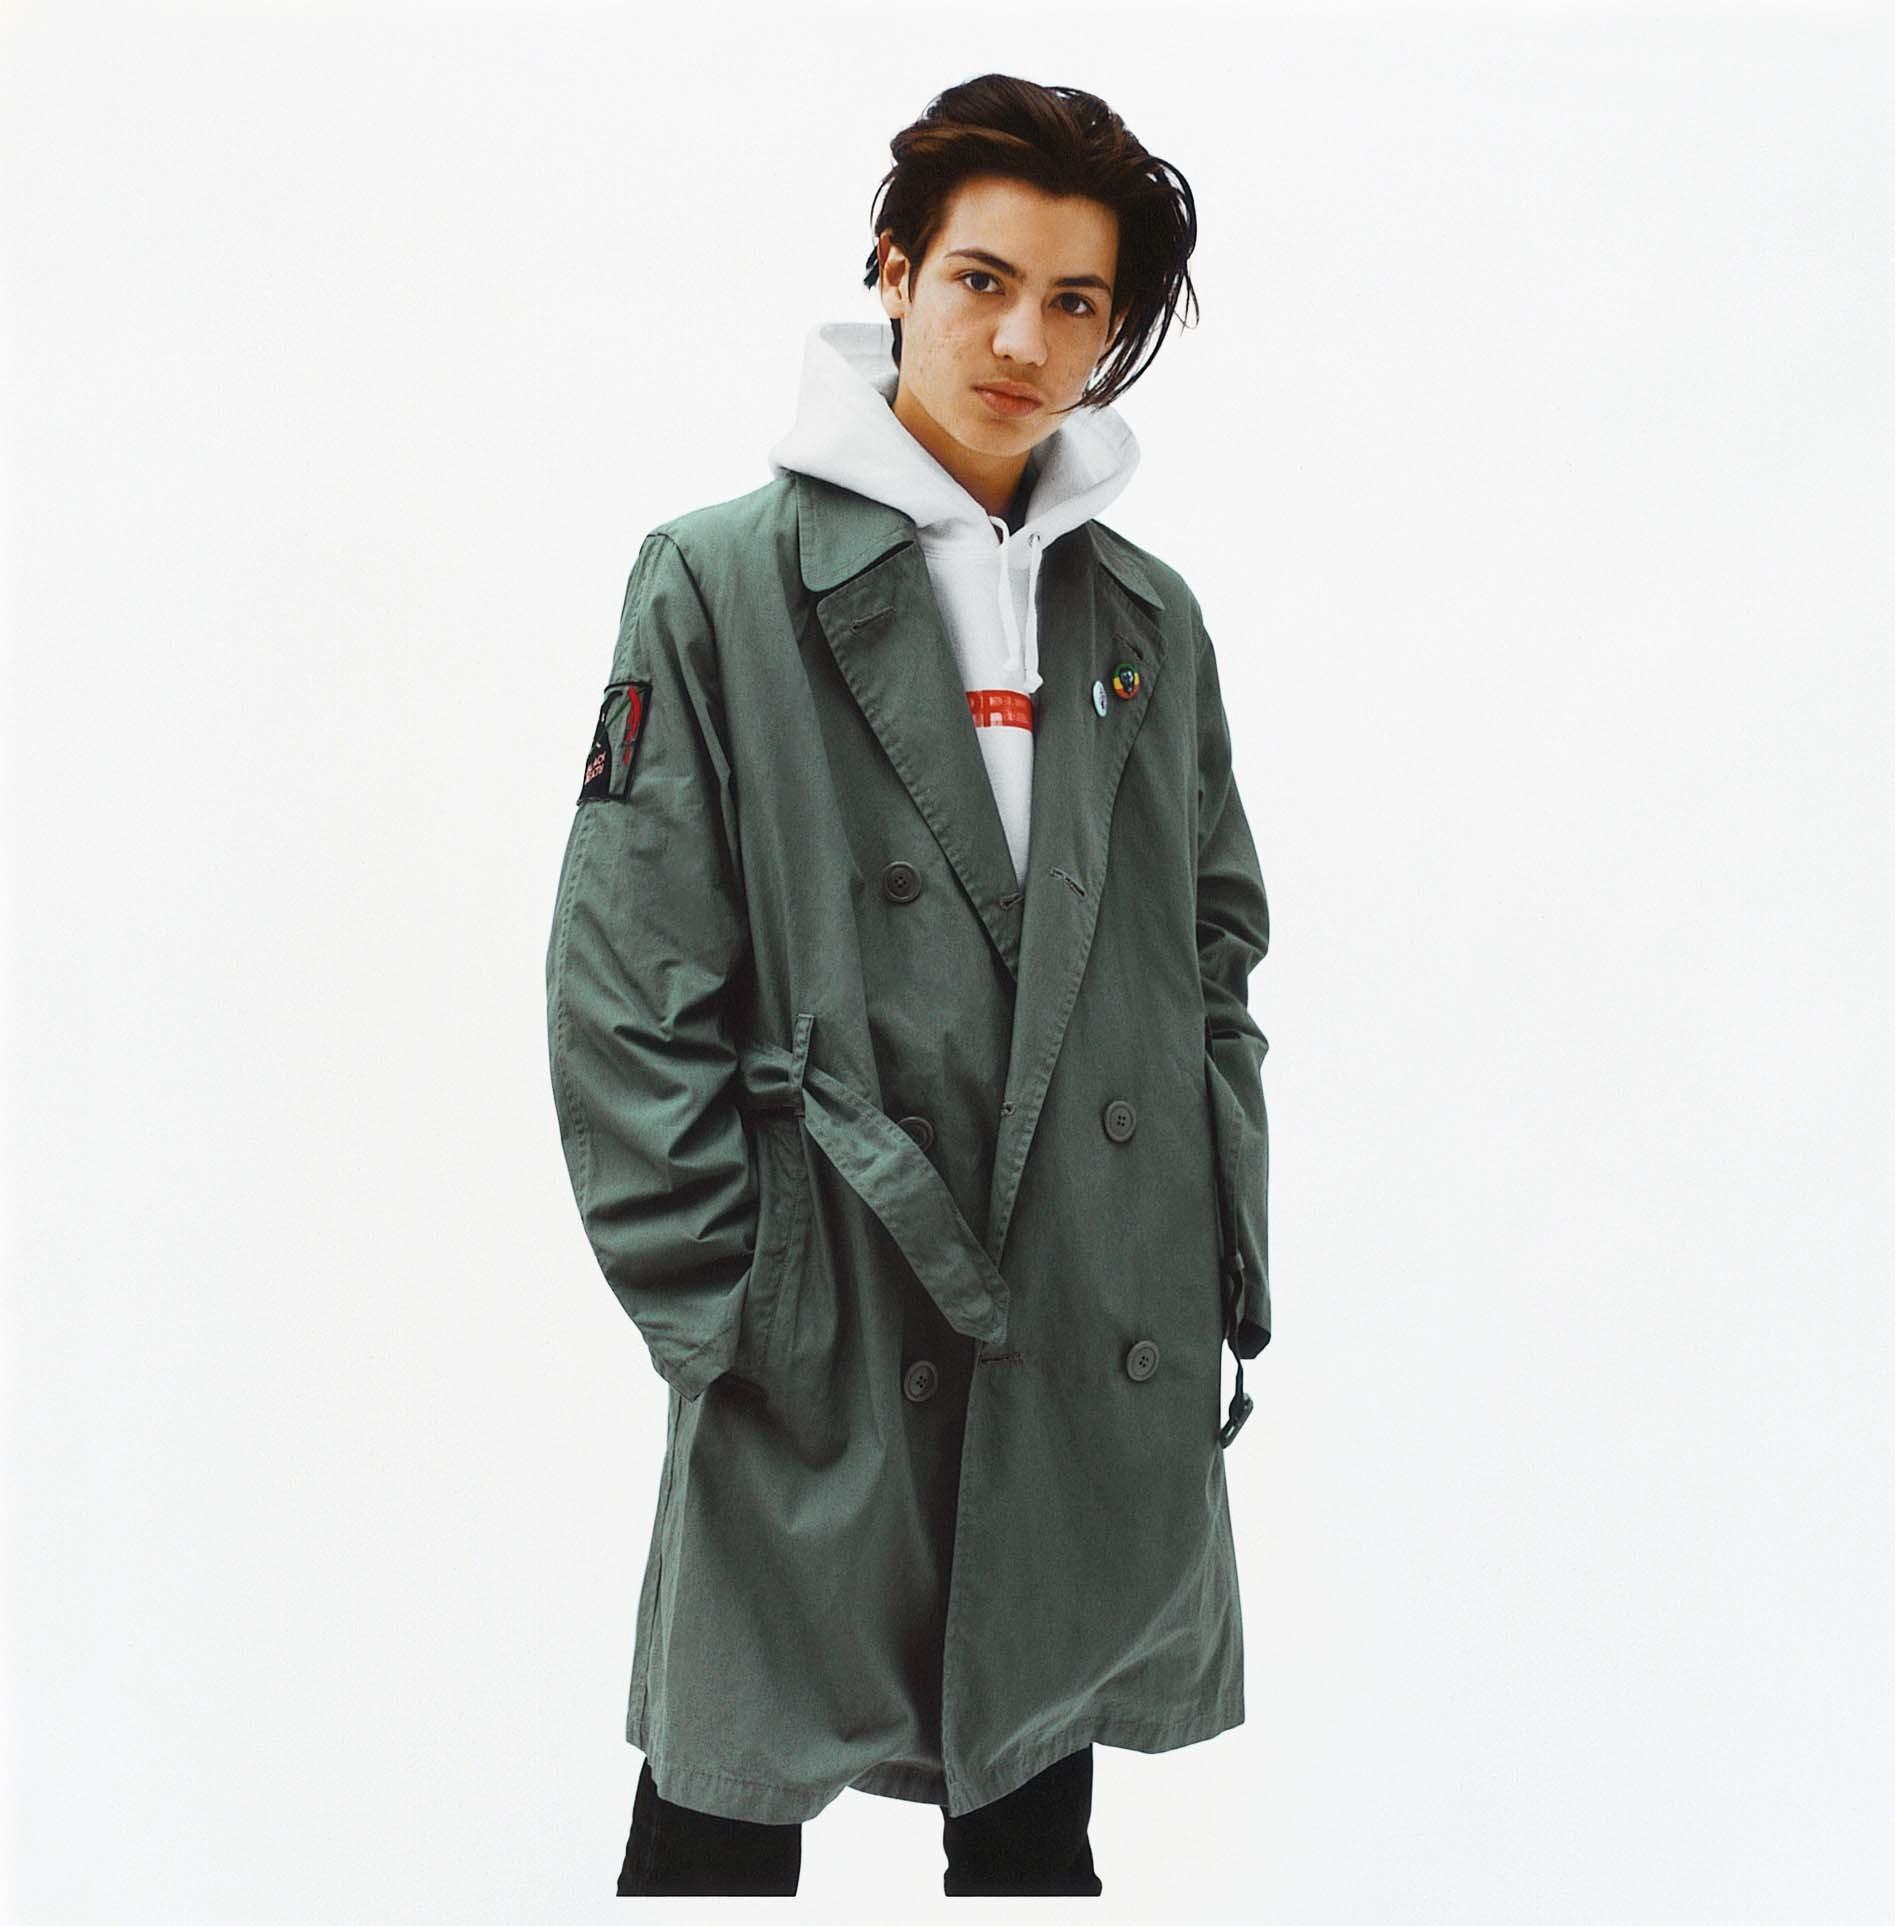 supreme unveils their spring/summer 16 collection | watch | i-D